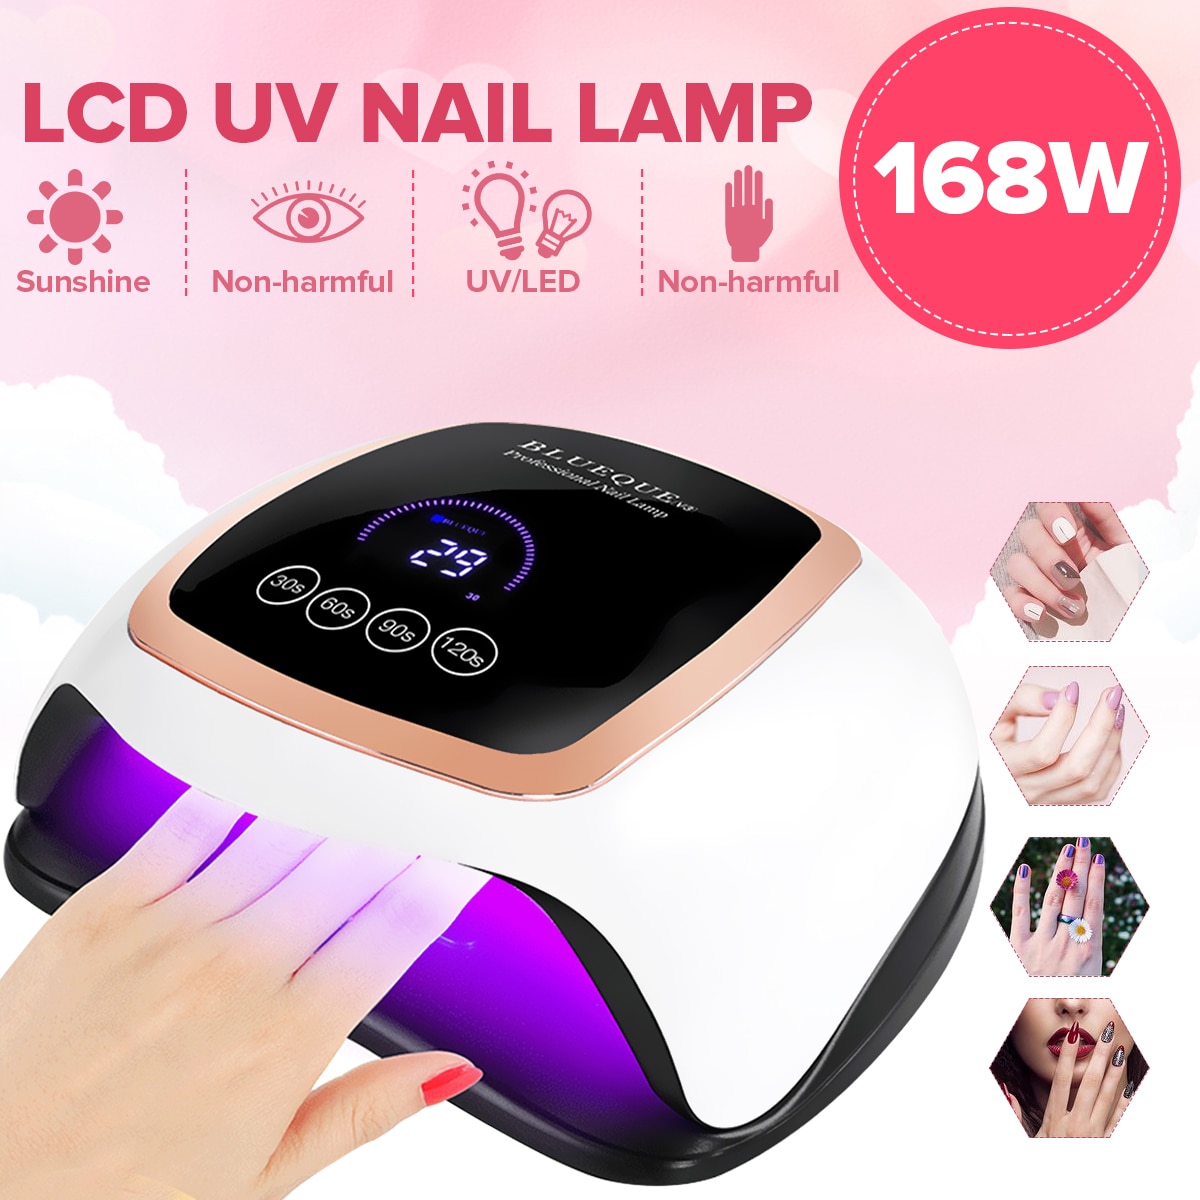 168W Nail Dryer Portable Led Uv Nail Lamp Usb Poolse Acryl Gel Curing-Lamp Manicure